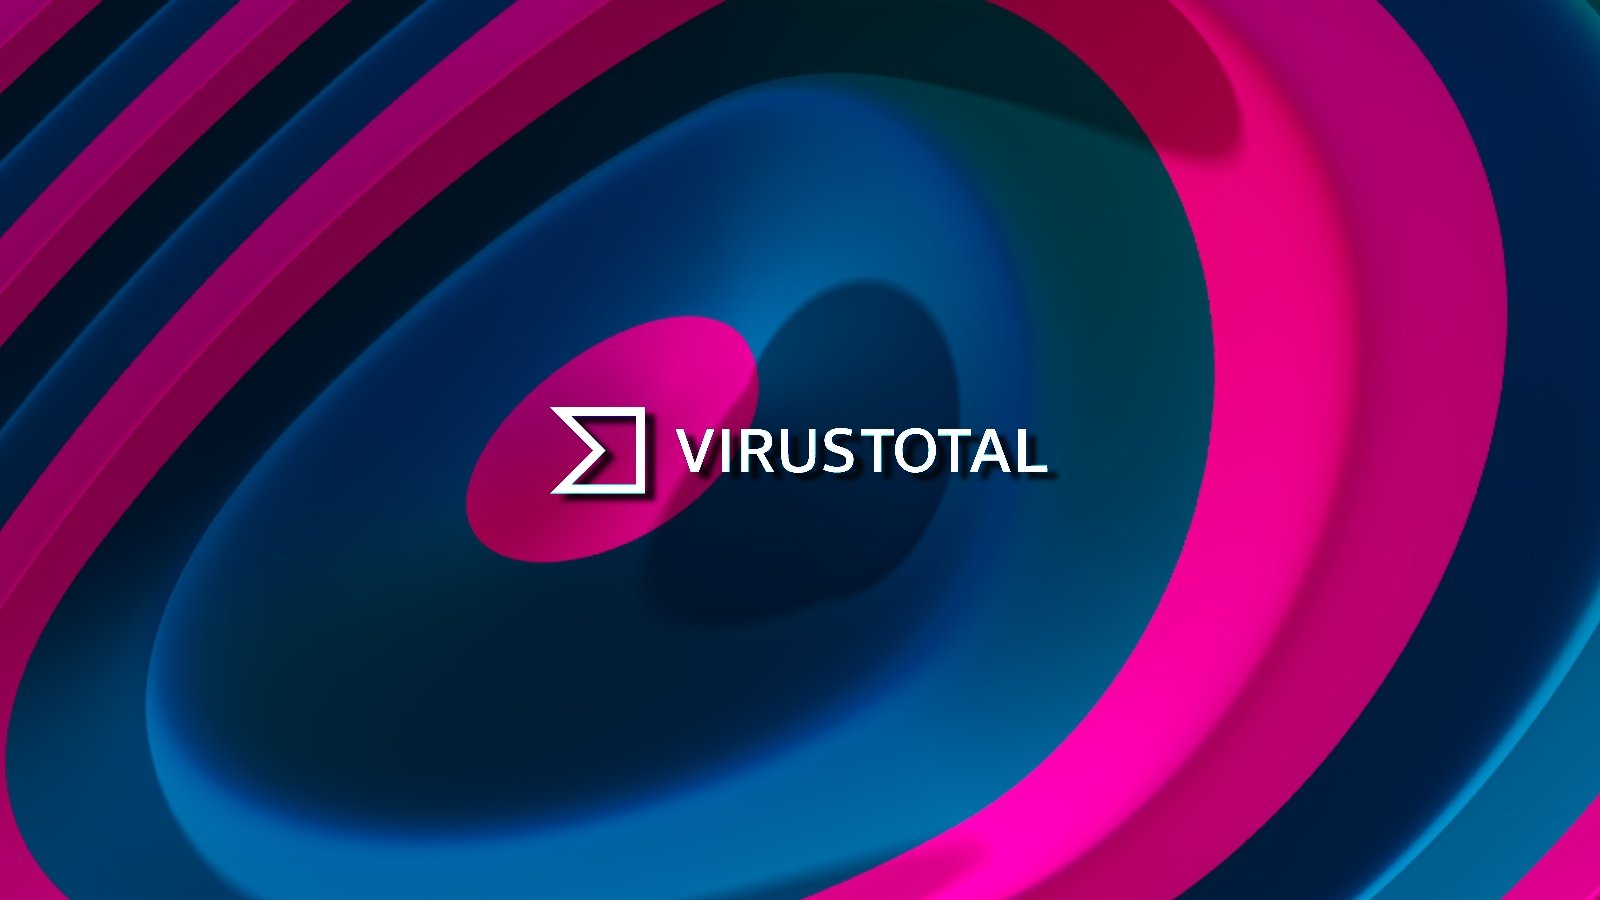 VirusTotal: Analyze Suspicious Files and Websites for Malware and Security Threats